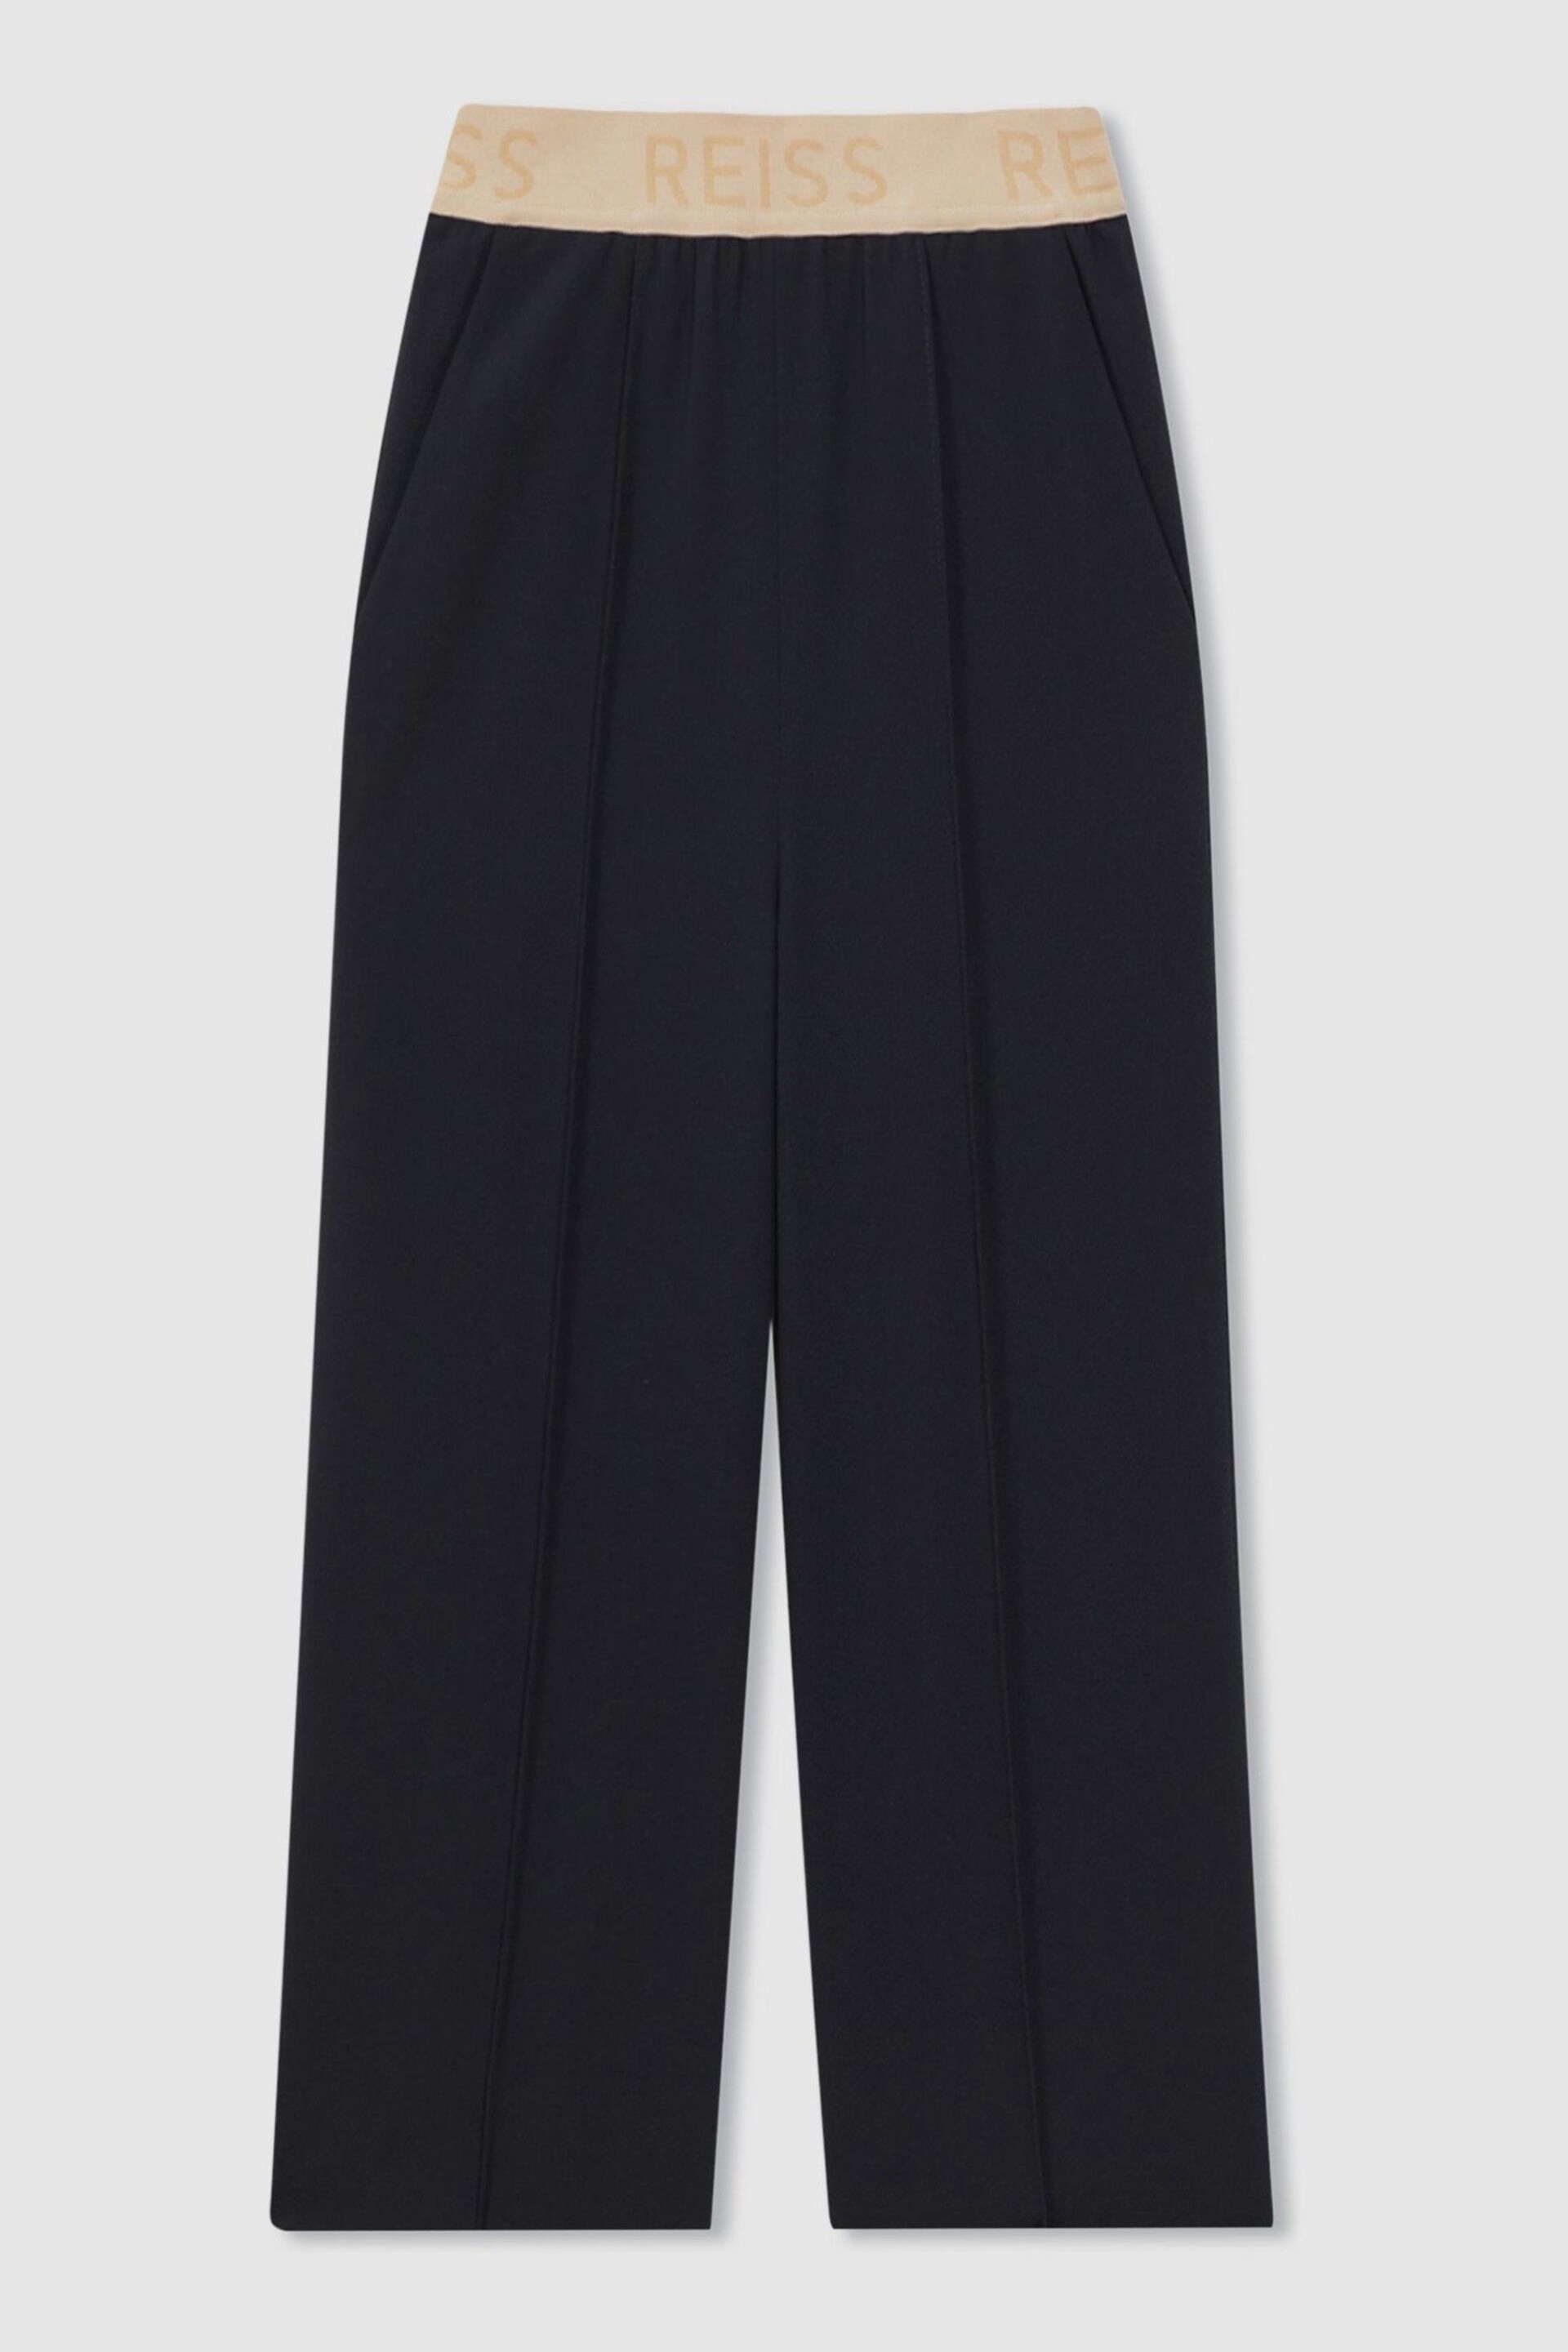 Reiss Navy Ayana Senior Elasticated Wide Leg Trousers - Image 2 of 5